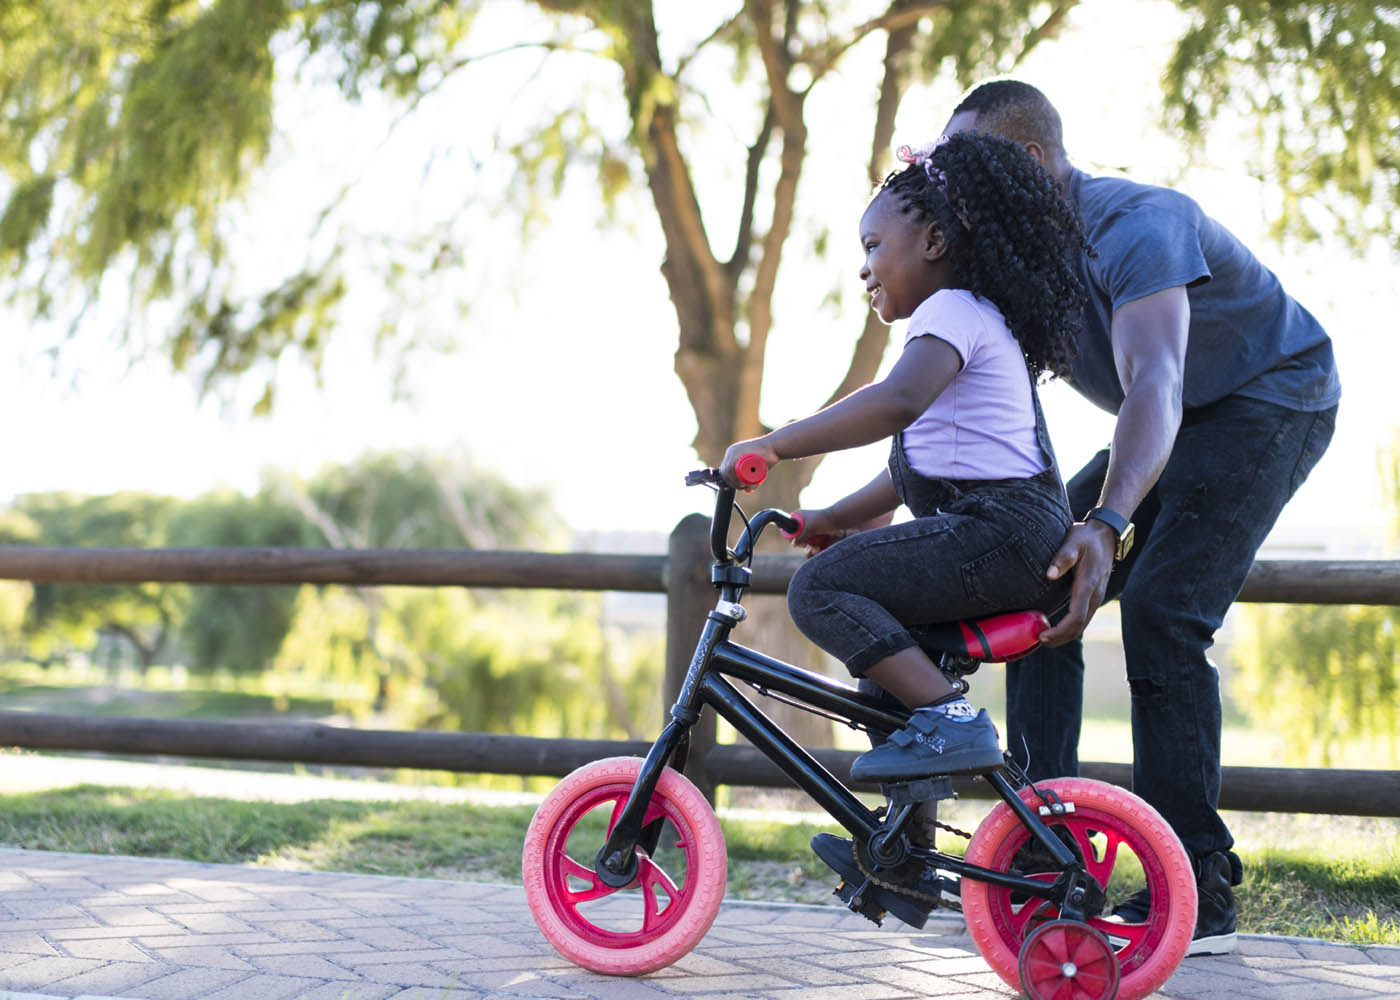 Tips for Helping Your Child Learn to Ride a Bike, Whatever Their Age